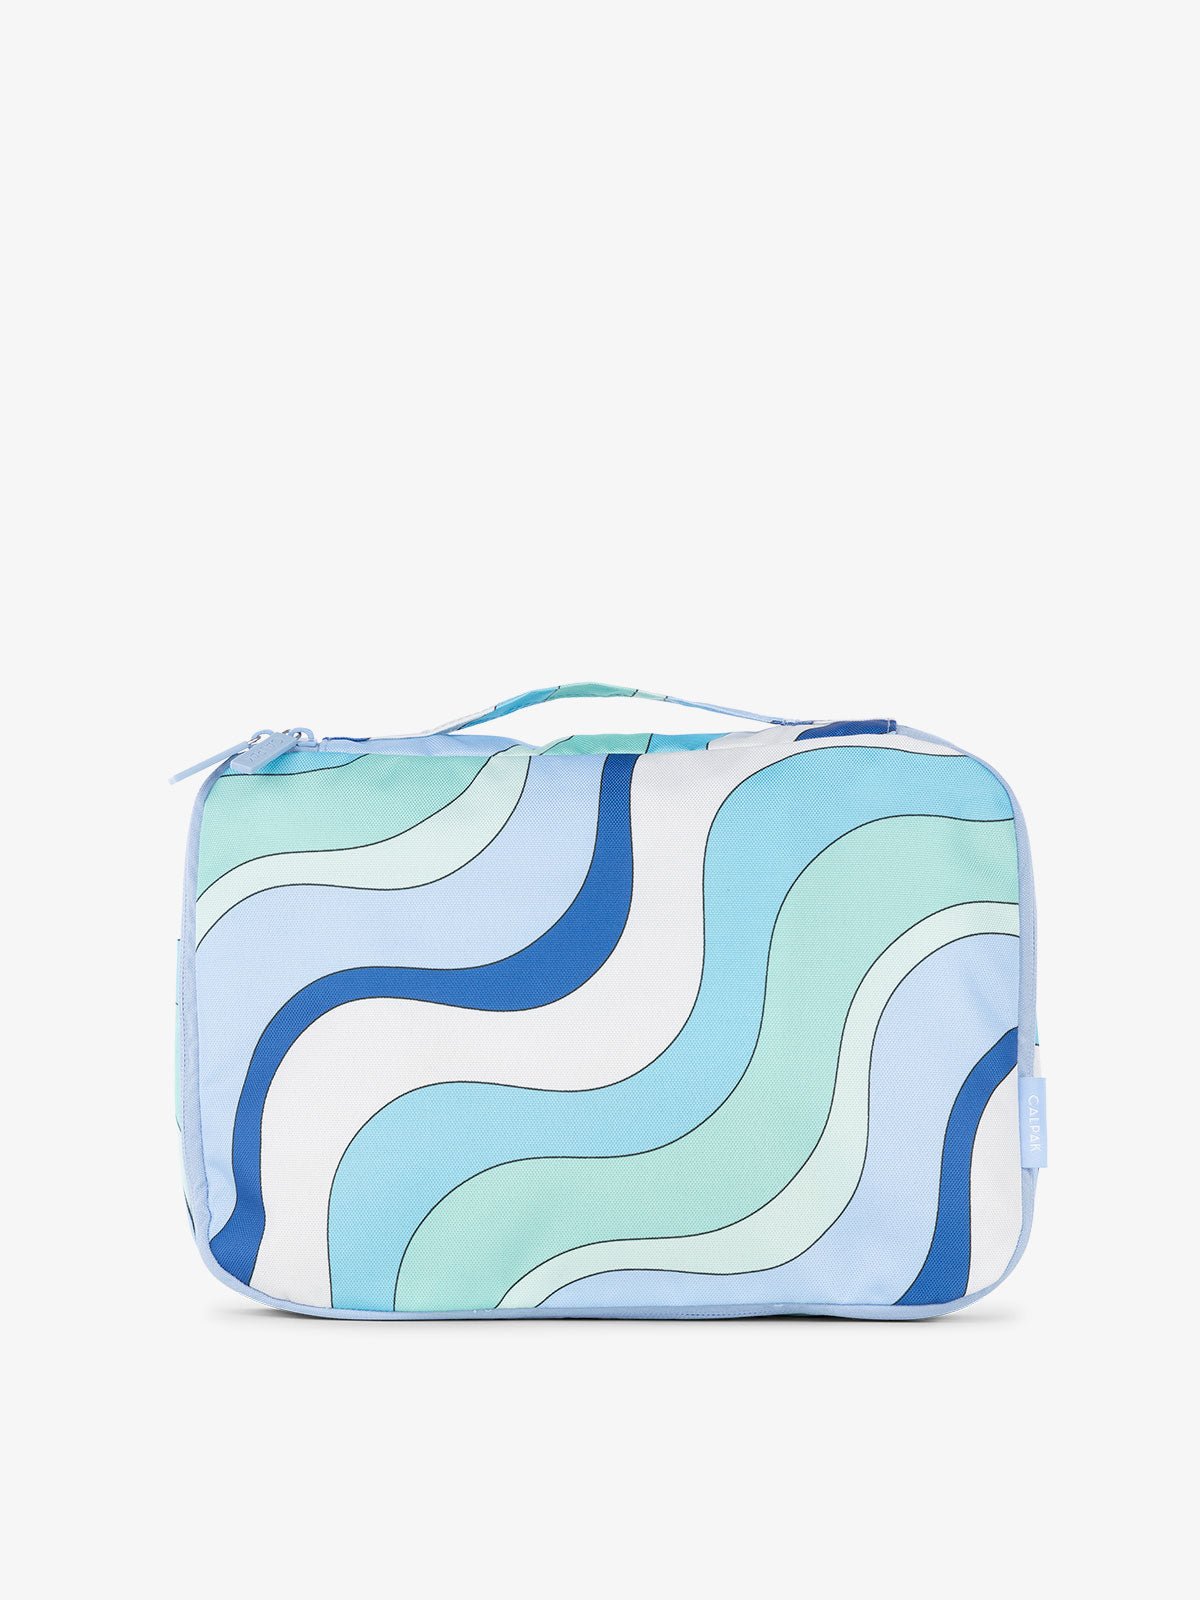 CALPAK packing cubes with top handle in wavy blue print